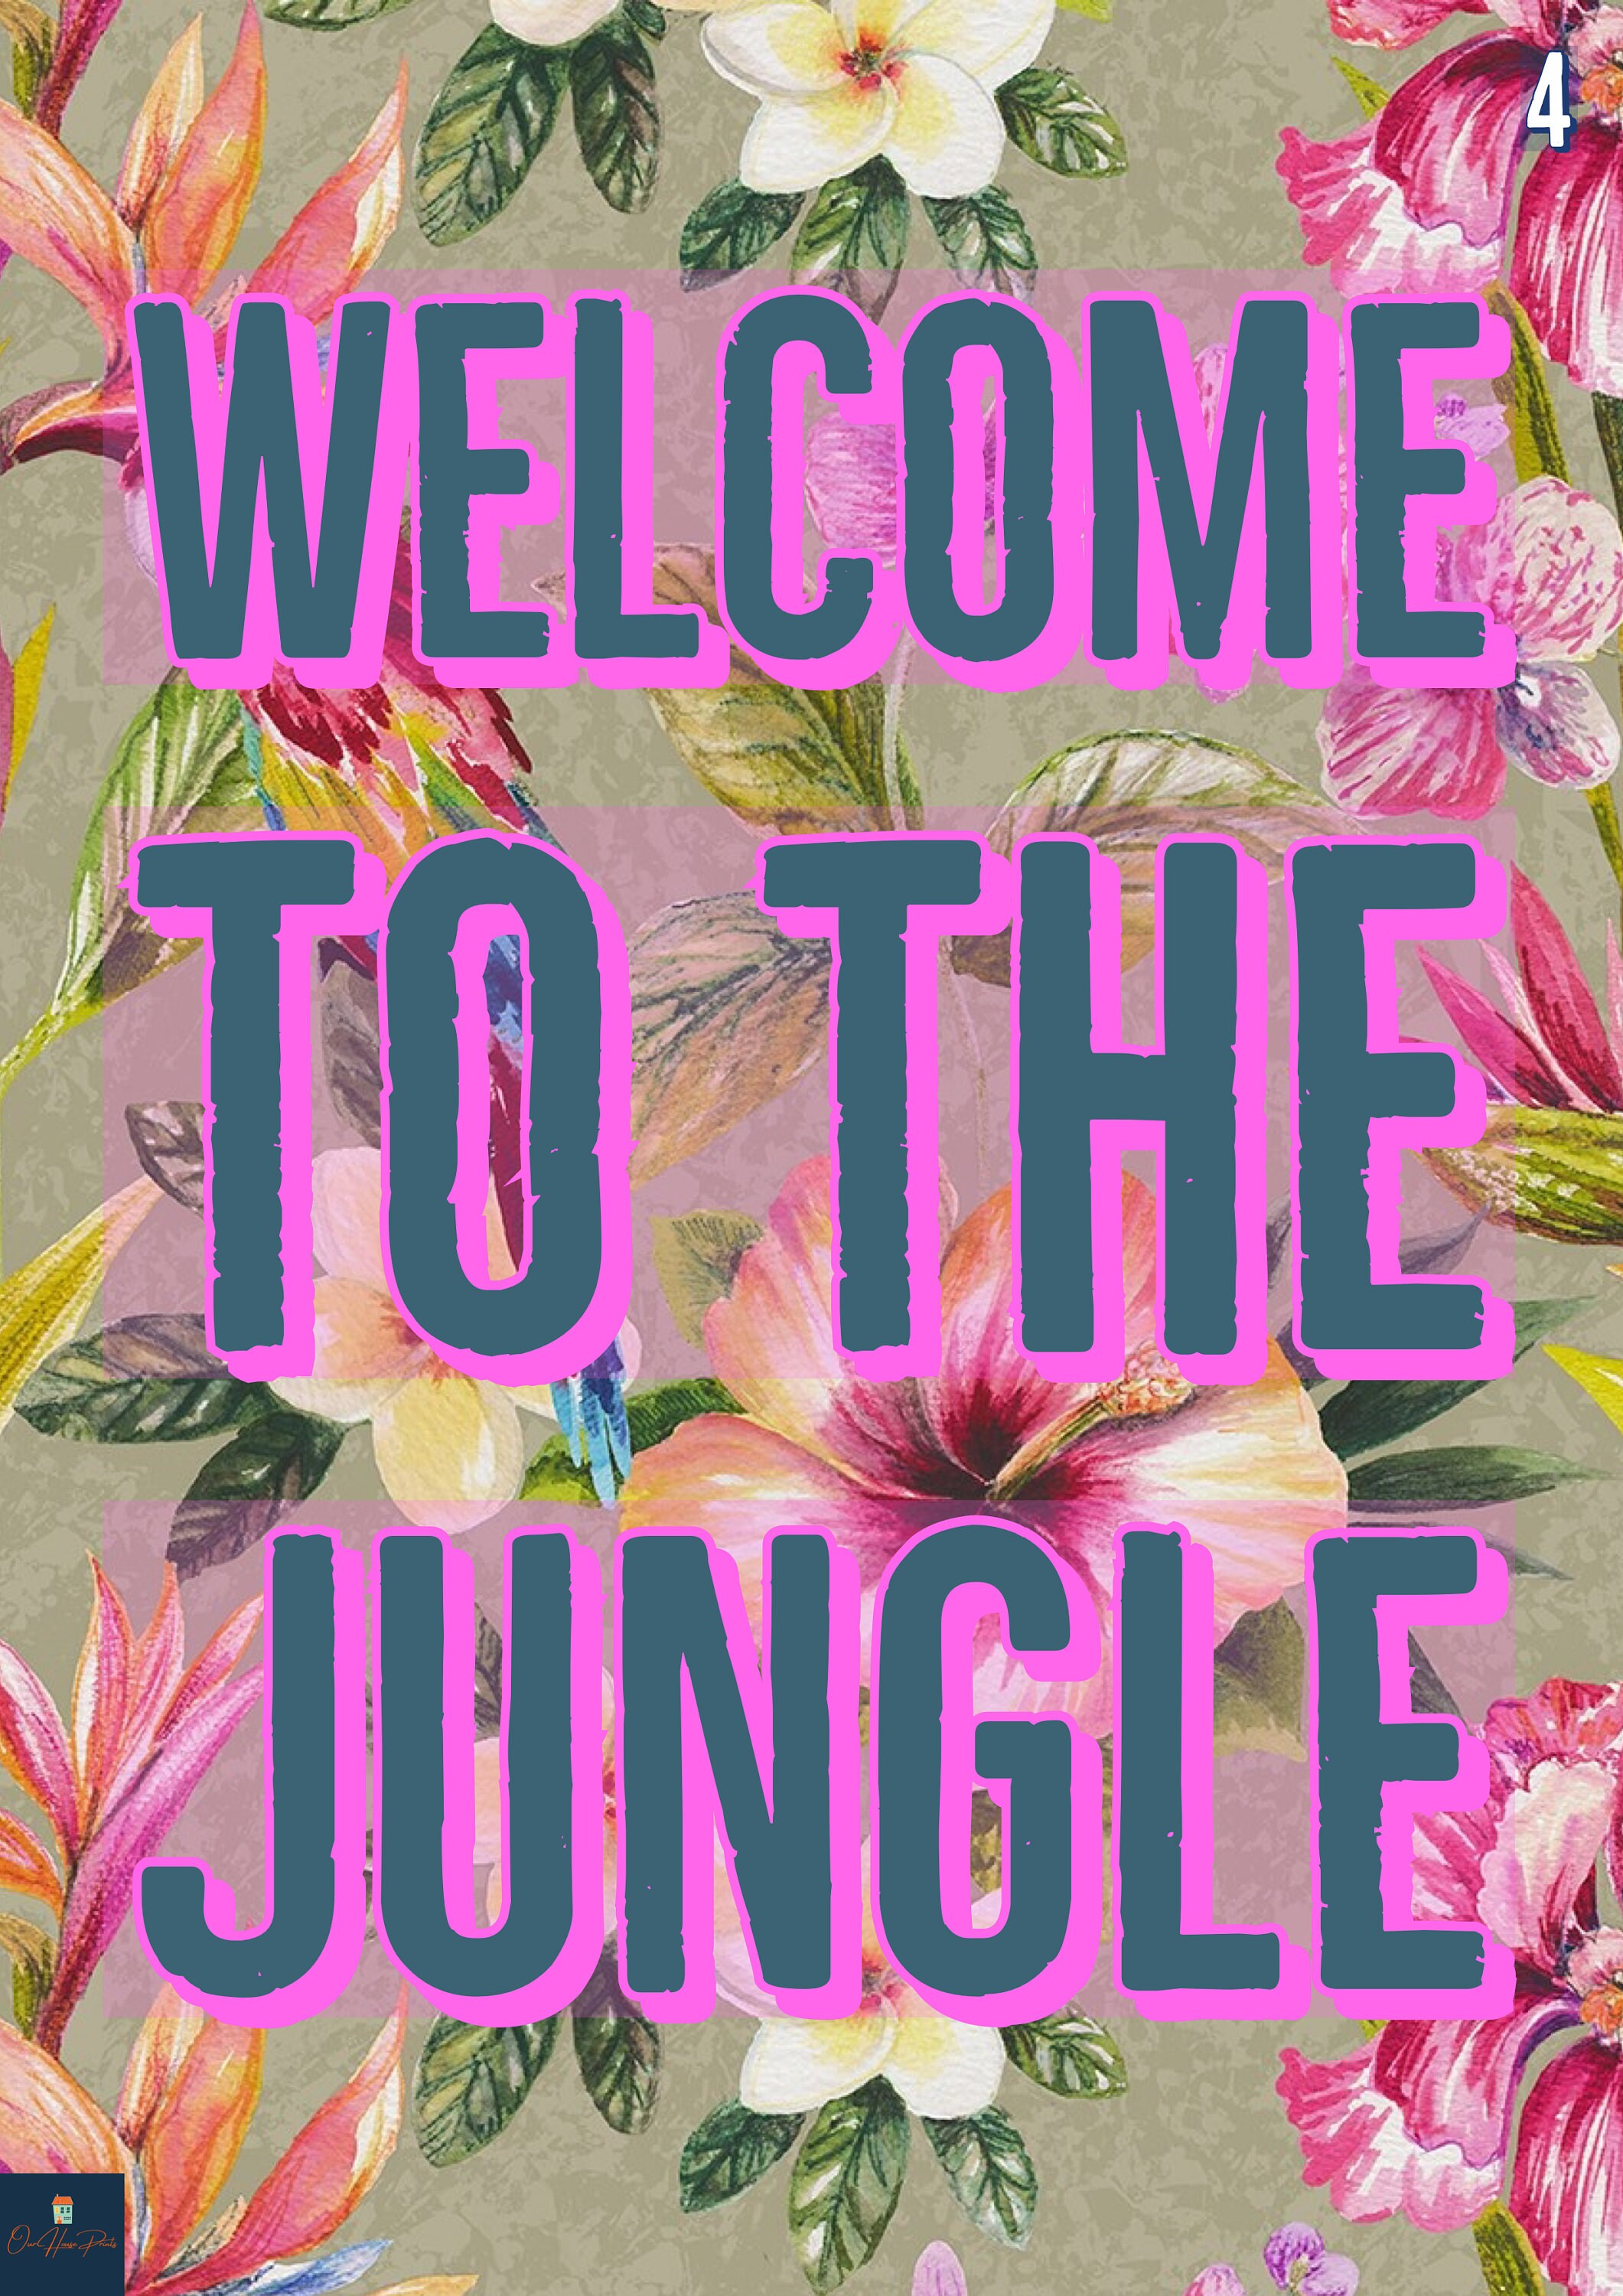  Eye Test Jungle Entry, Welcome to The Jungle Doormat, Welcome  to The Jungle Lyrics, Rock Song Lyrics, Eye Test, Jungle Doormat, Jungle  Way : Patio, Lawn & Garden